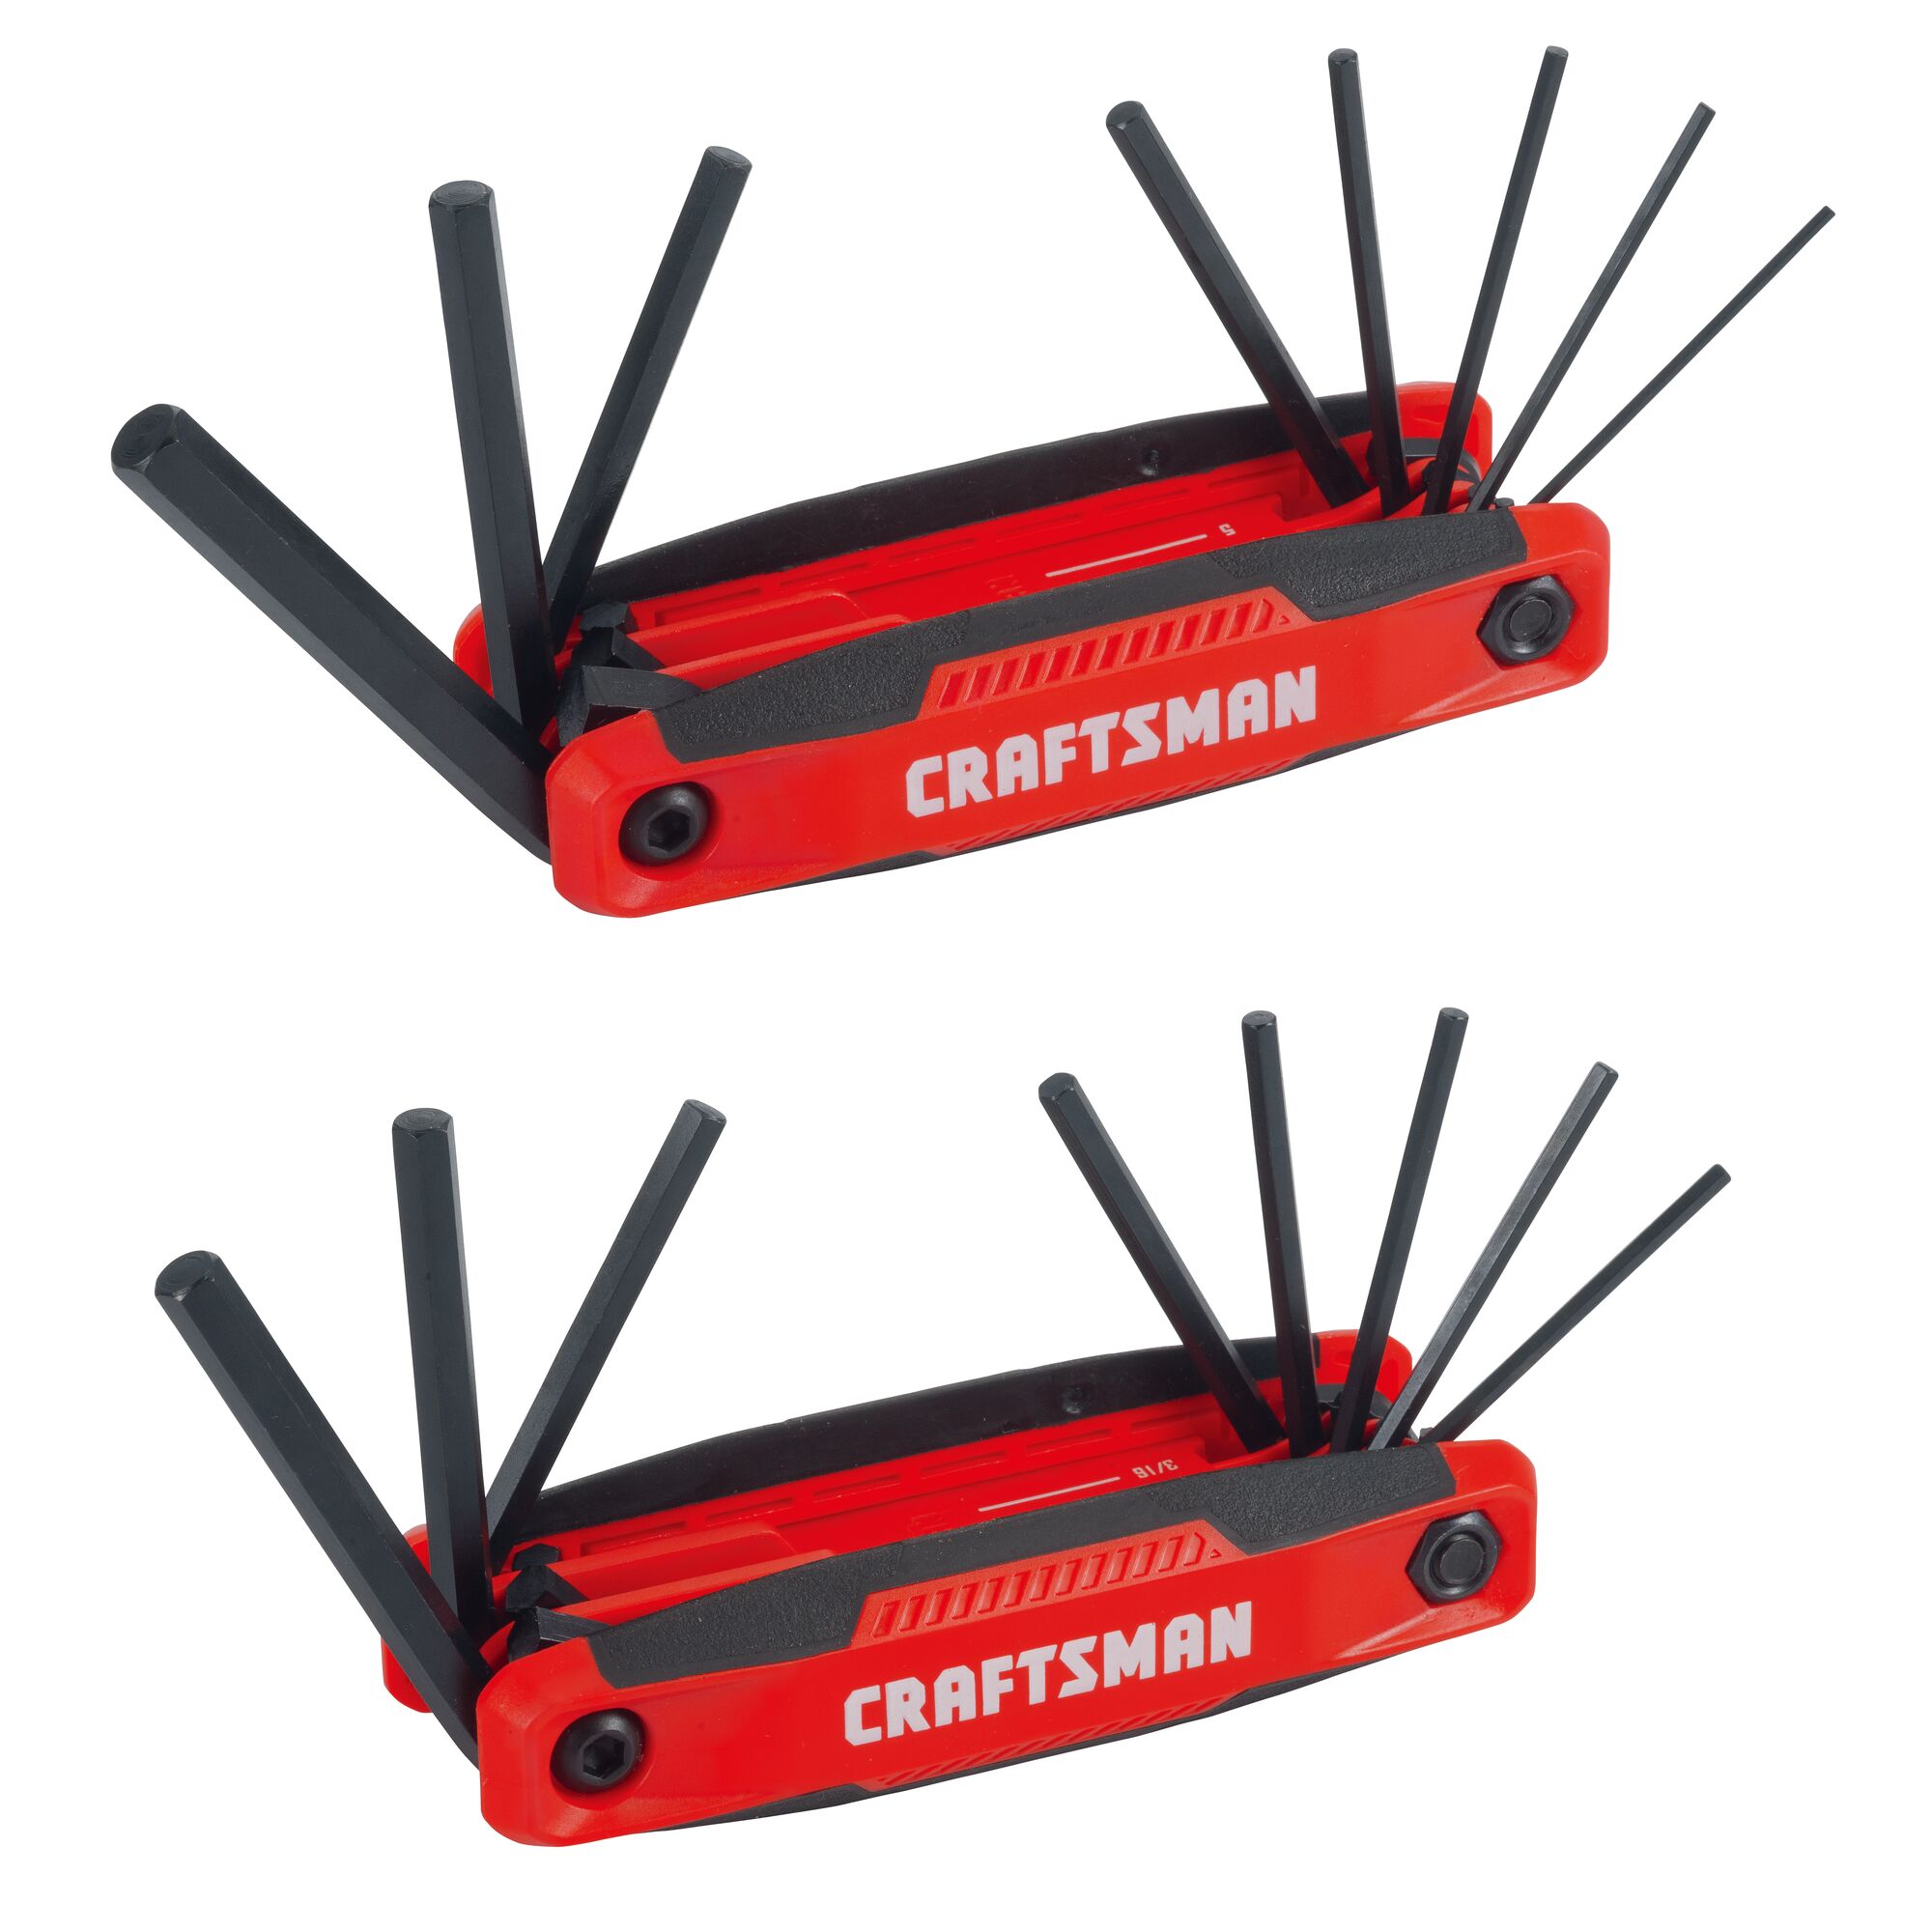 View of CRAFTSMAN Screwdrivers: Hex Keys on white background